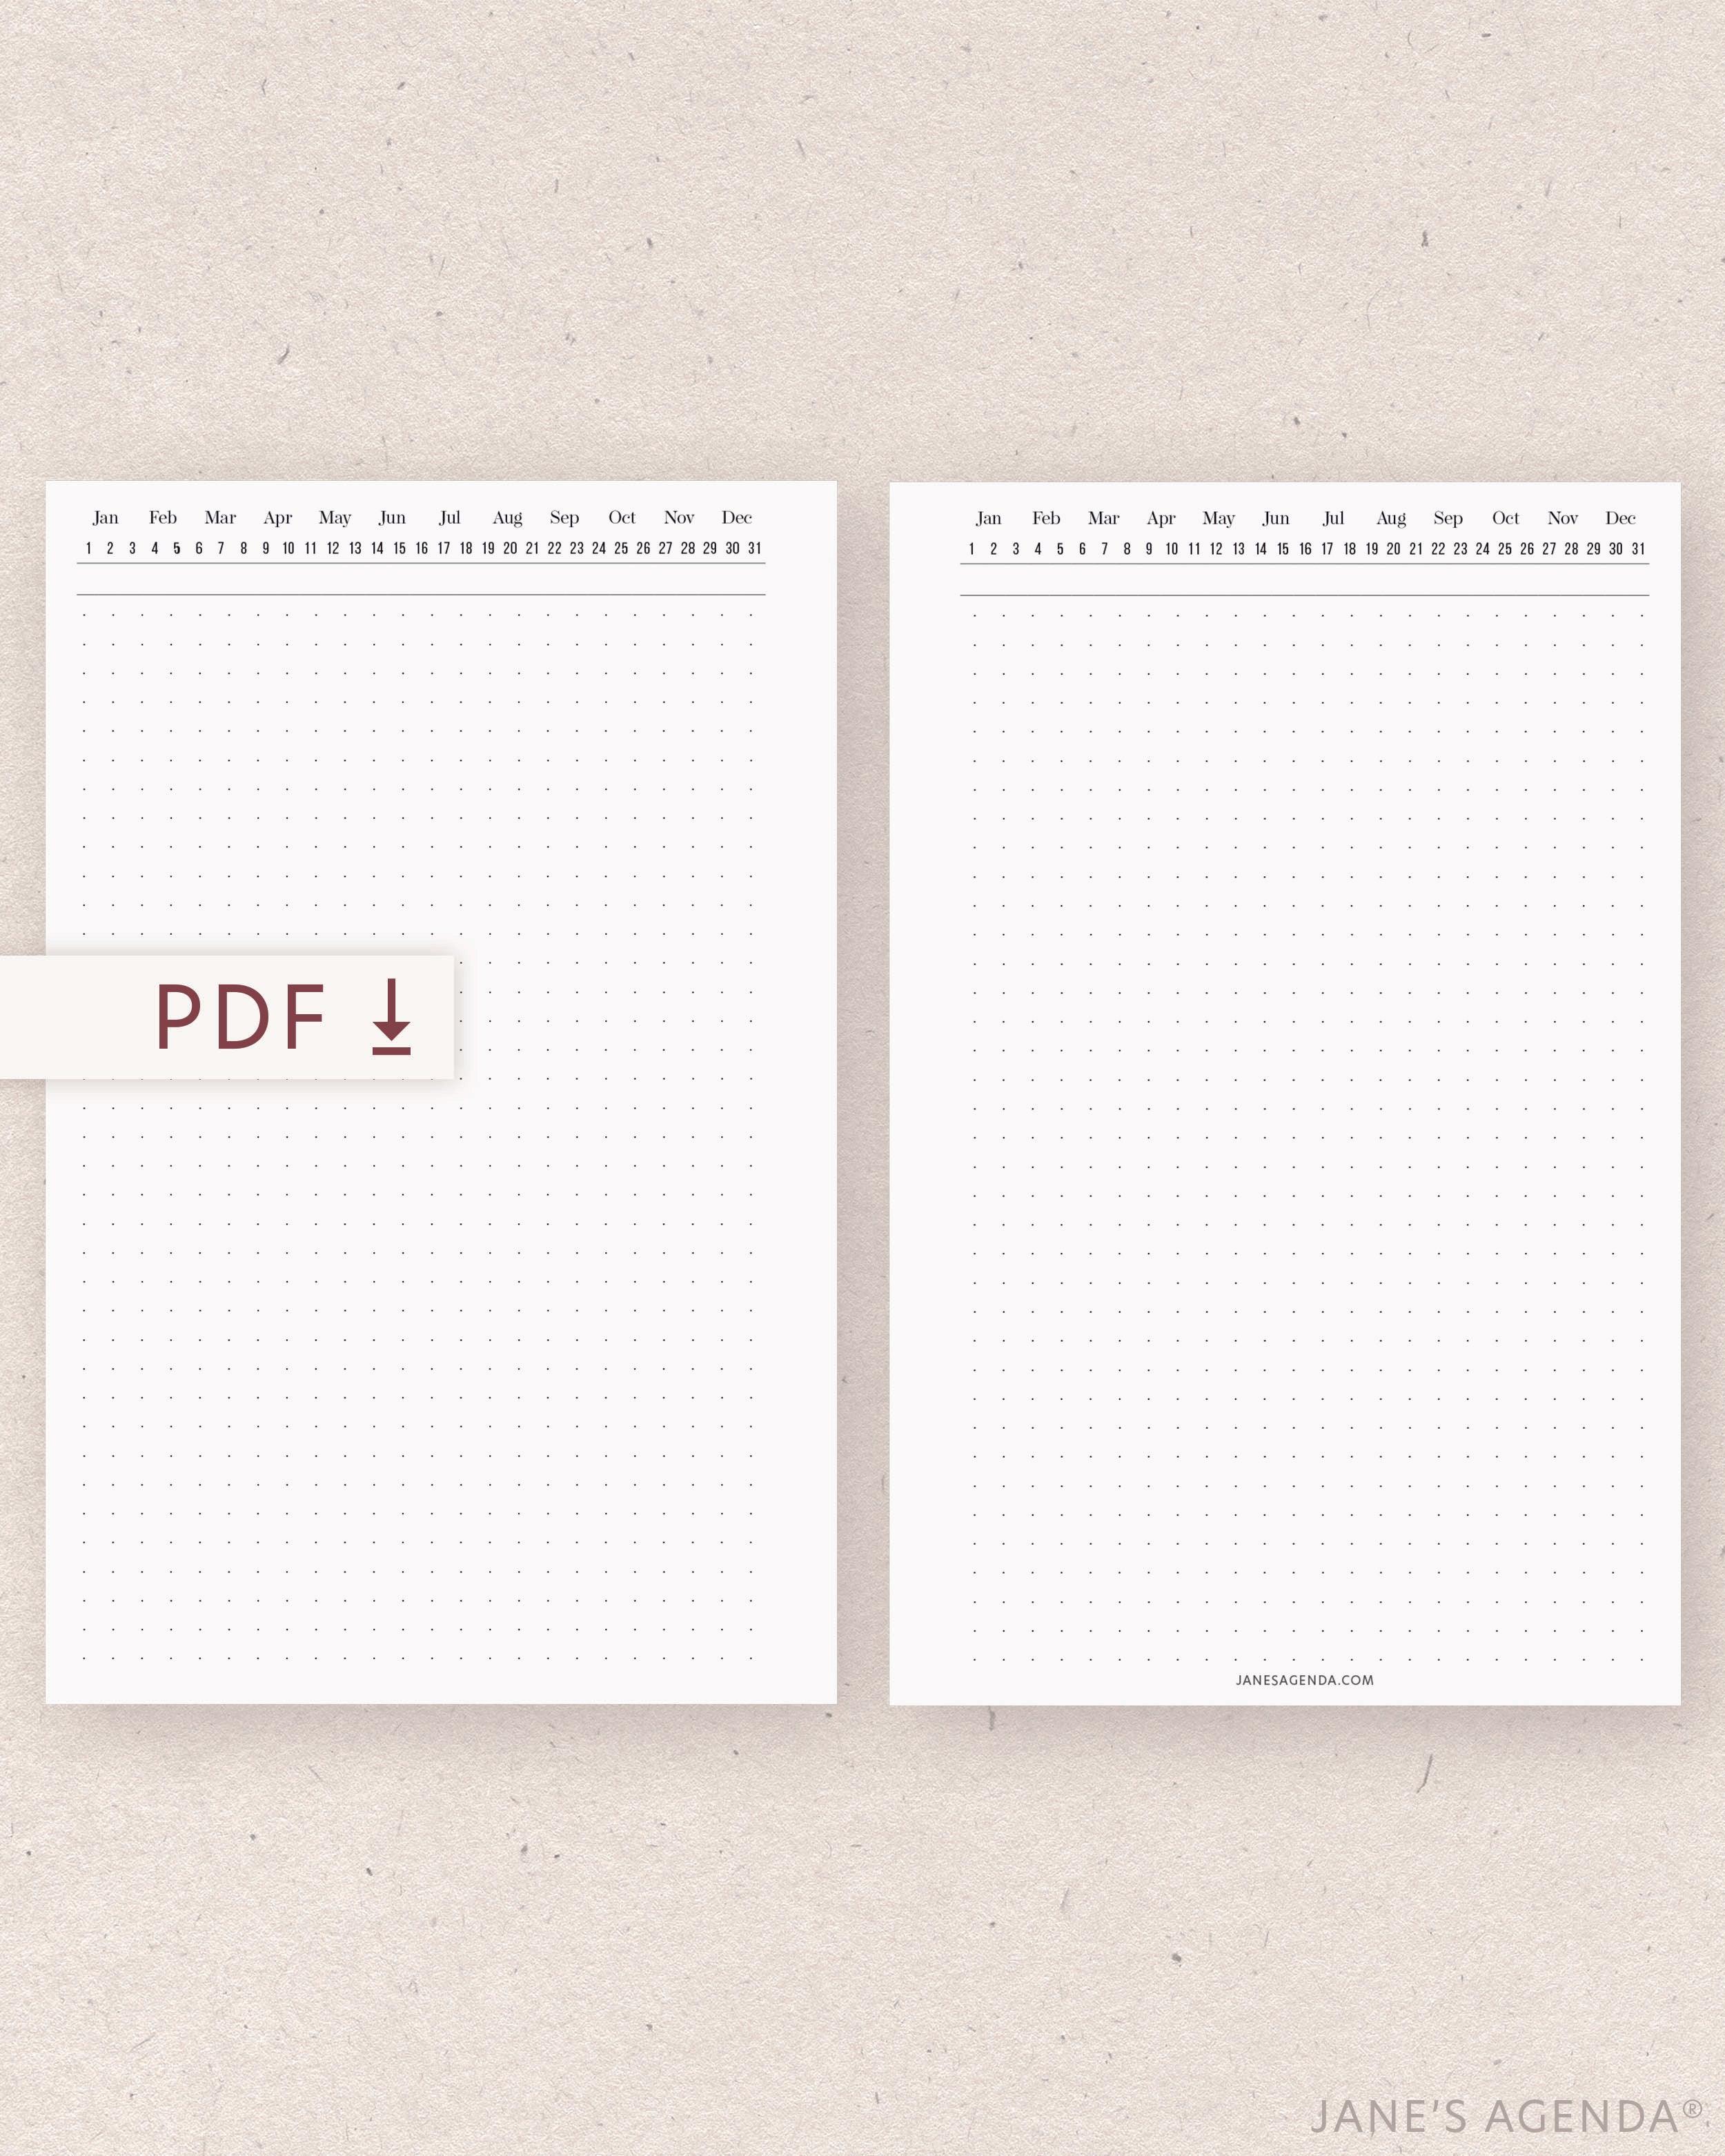 Printable planner inserts by Jane's Agenda for disbound and six ring planners and planner binder systems.